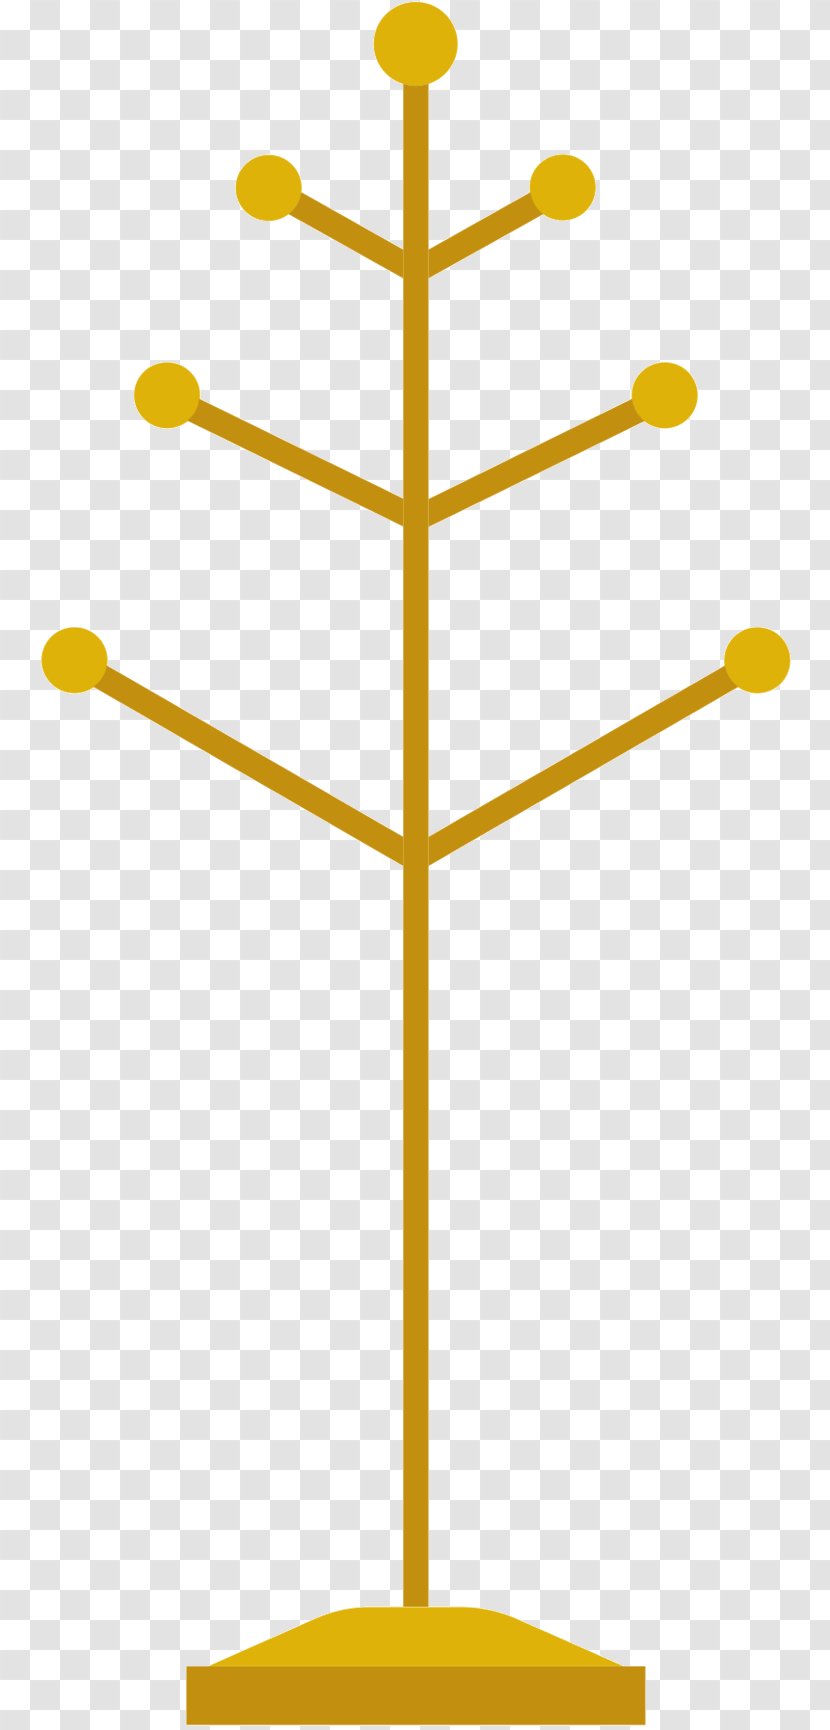 Product Design Line Angle Tree - Yellow - Musical Instrument Accessory Transparent PNG